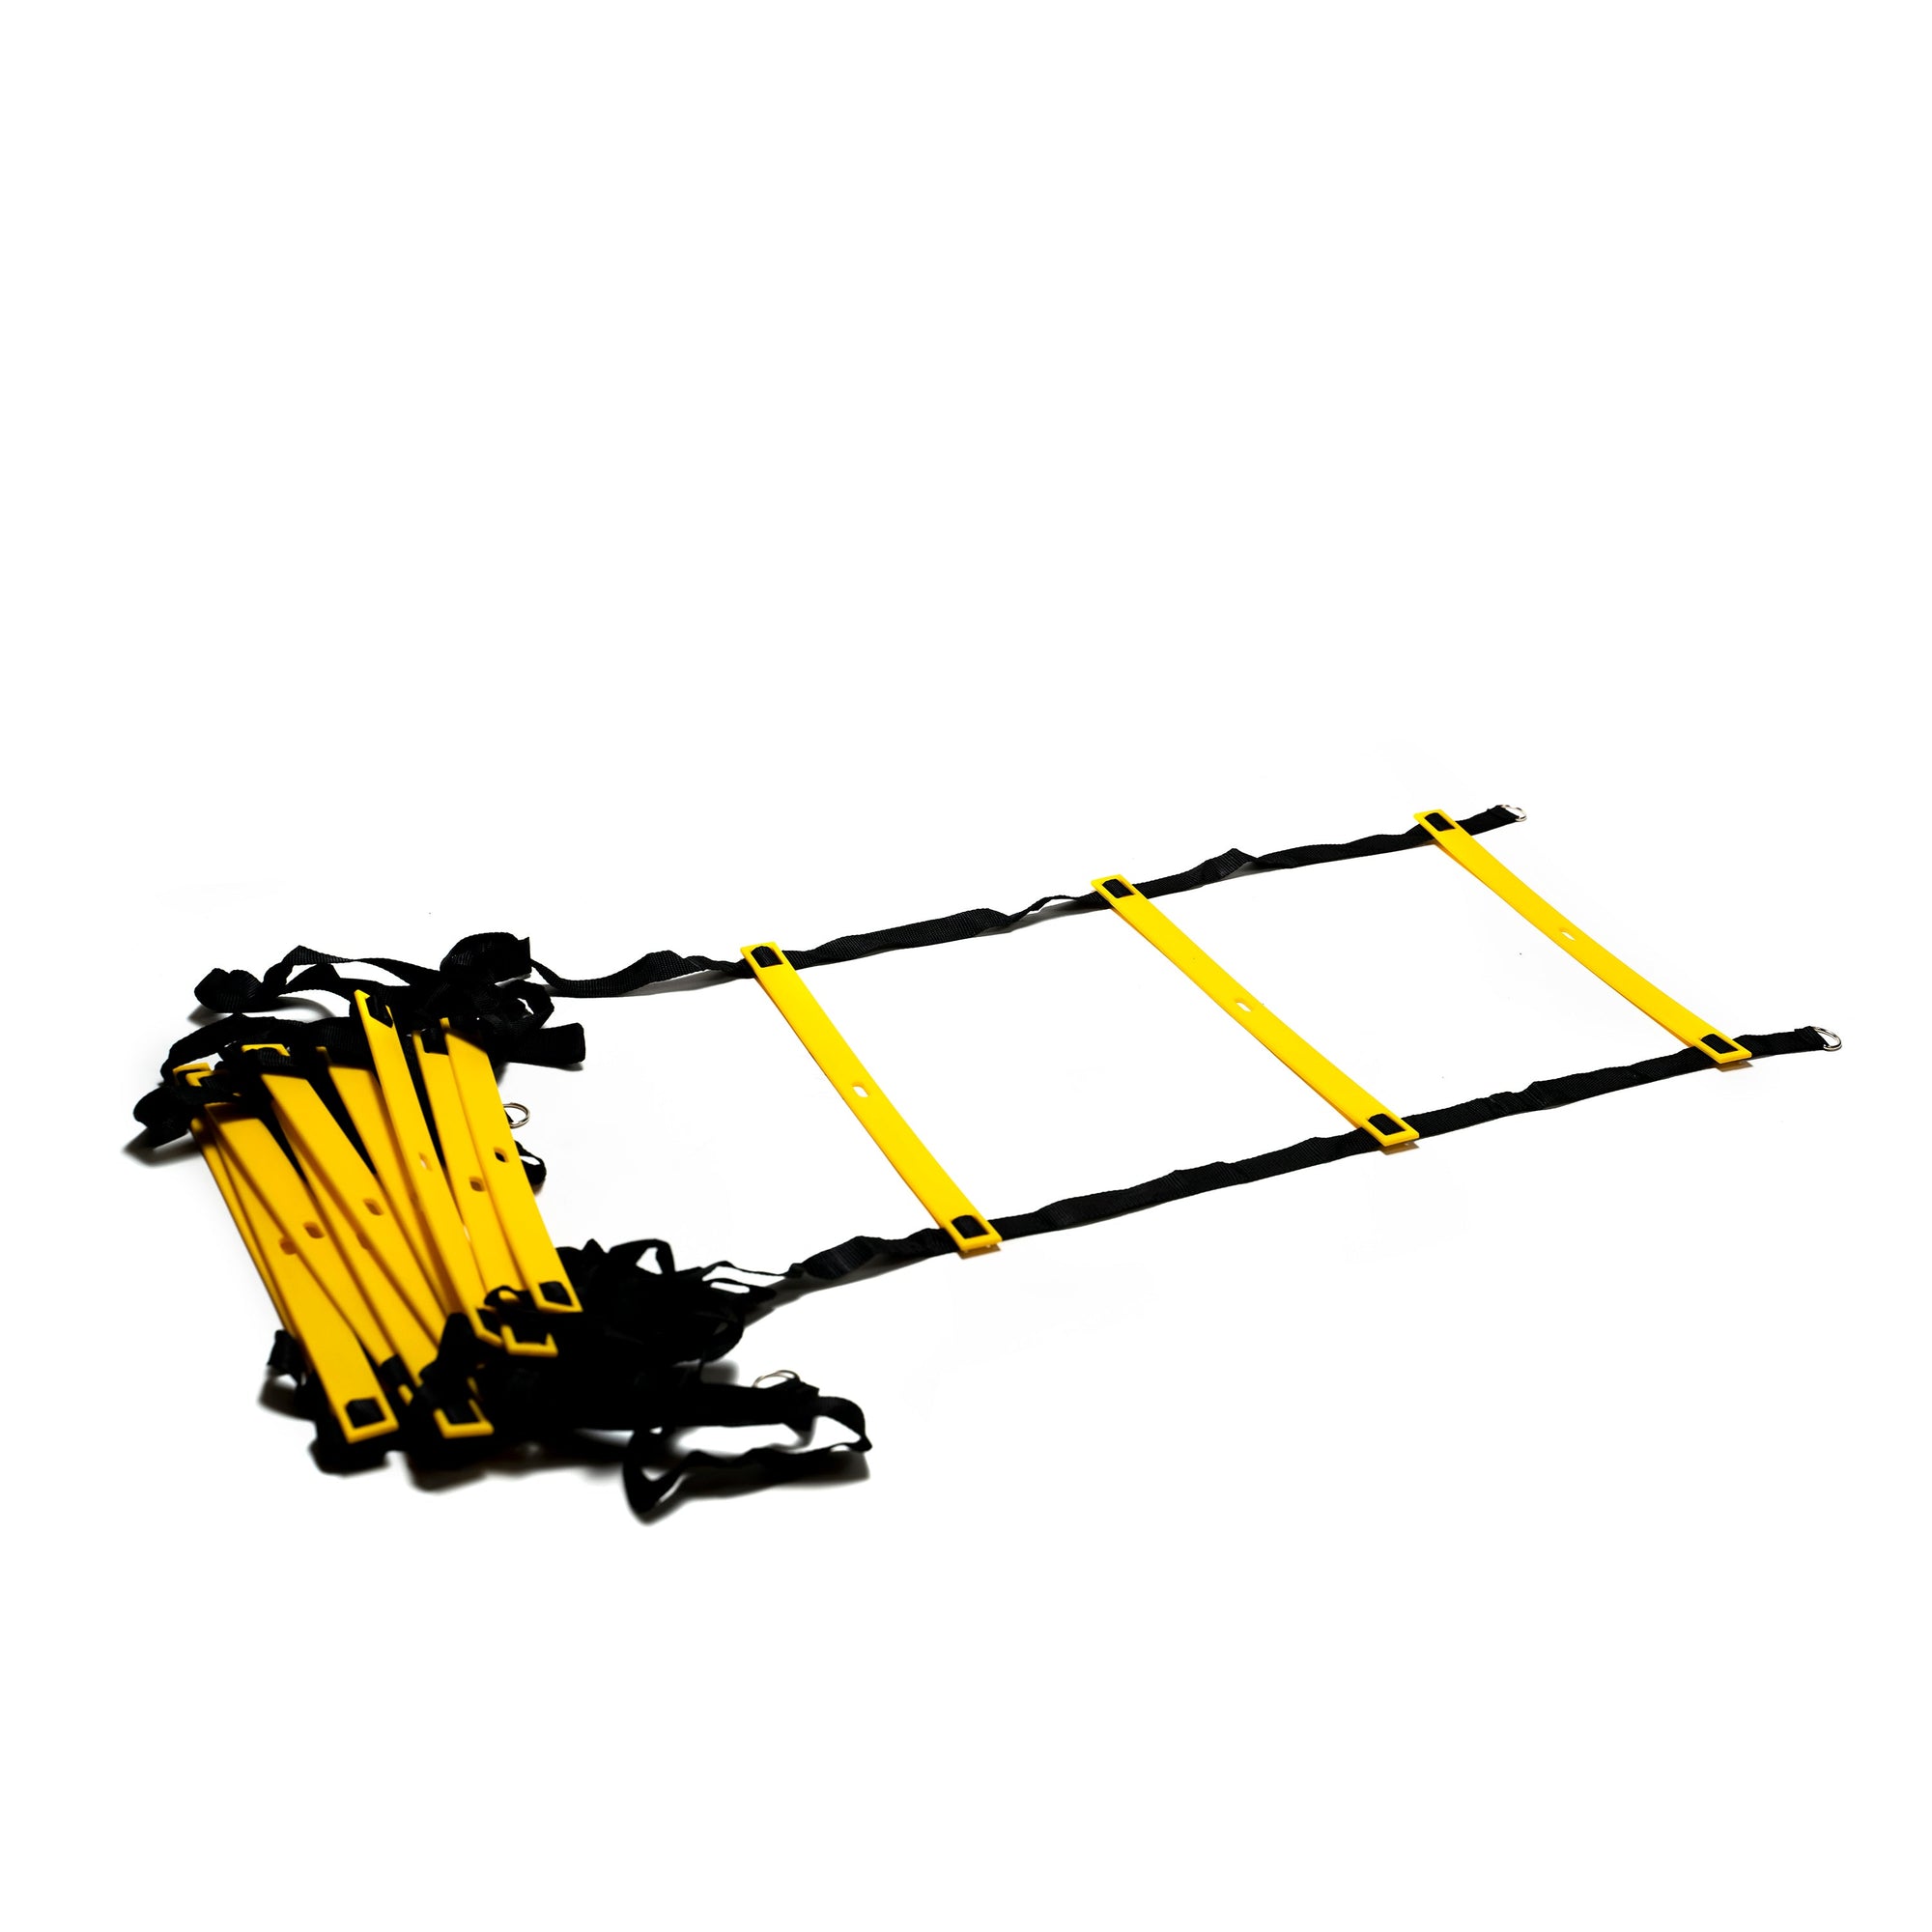 FitWay Equip. 15' Agility Ladder